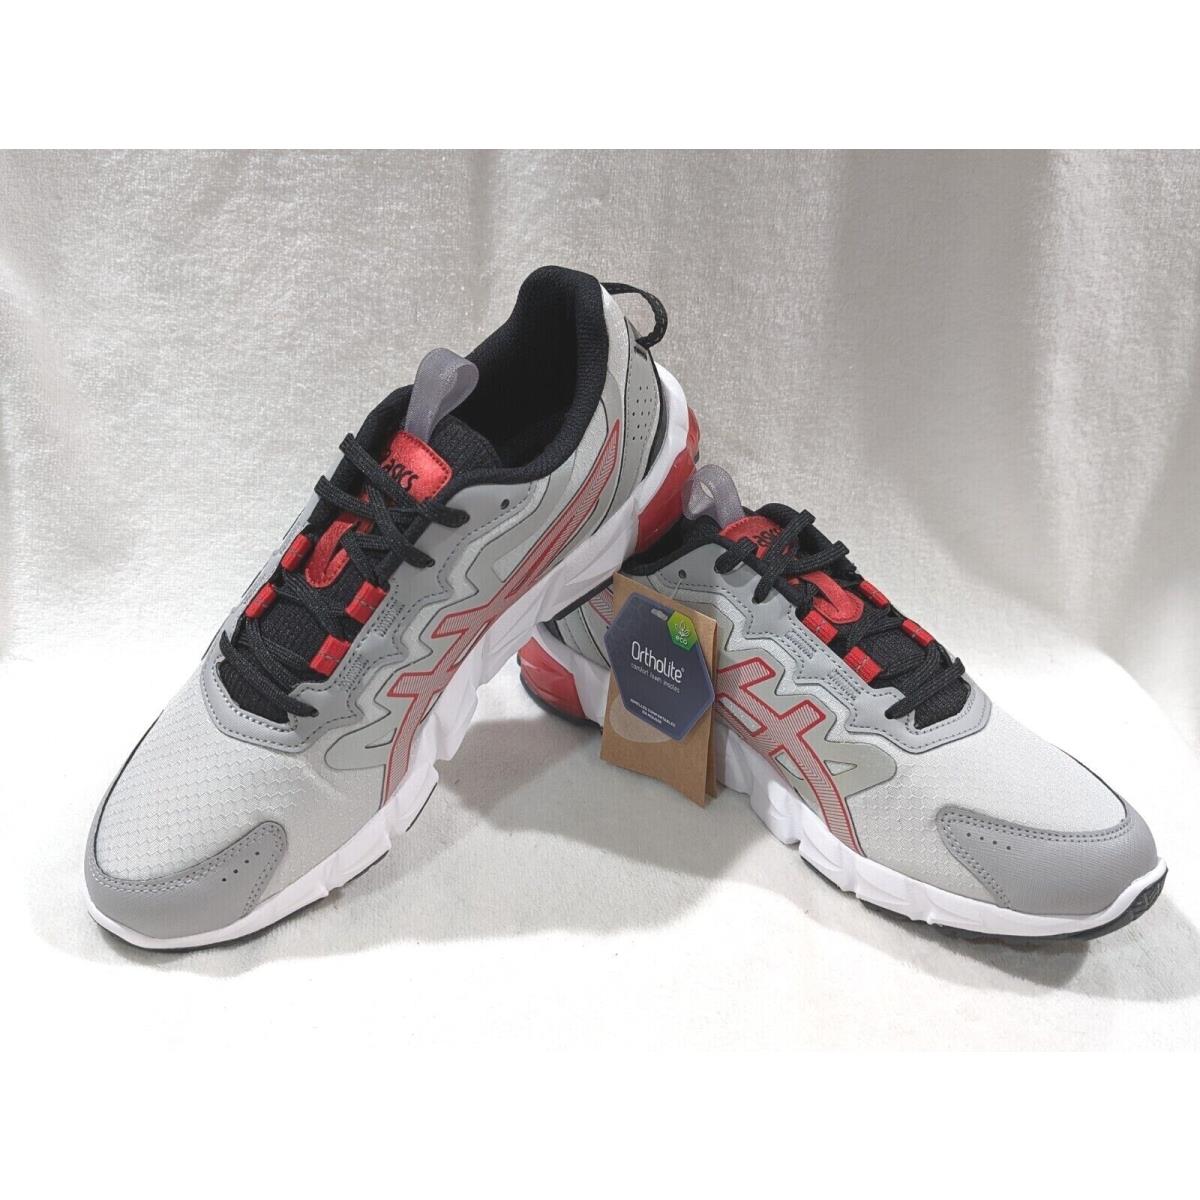 Asics Men`s Gel-quantum 90 3 Grey/red Running Shoes - Size 9/13 1201A651-021